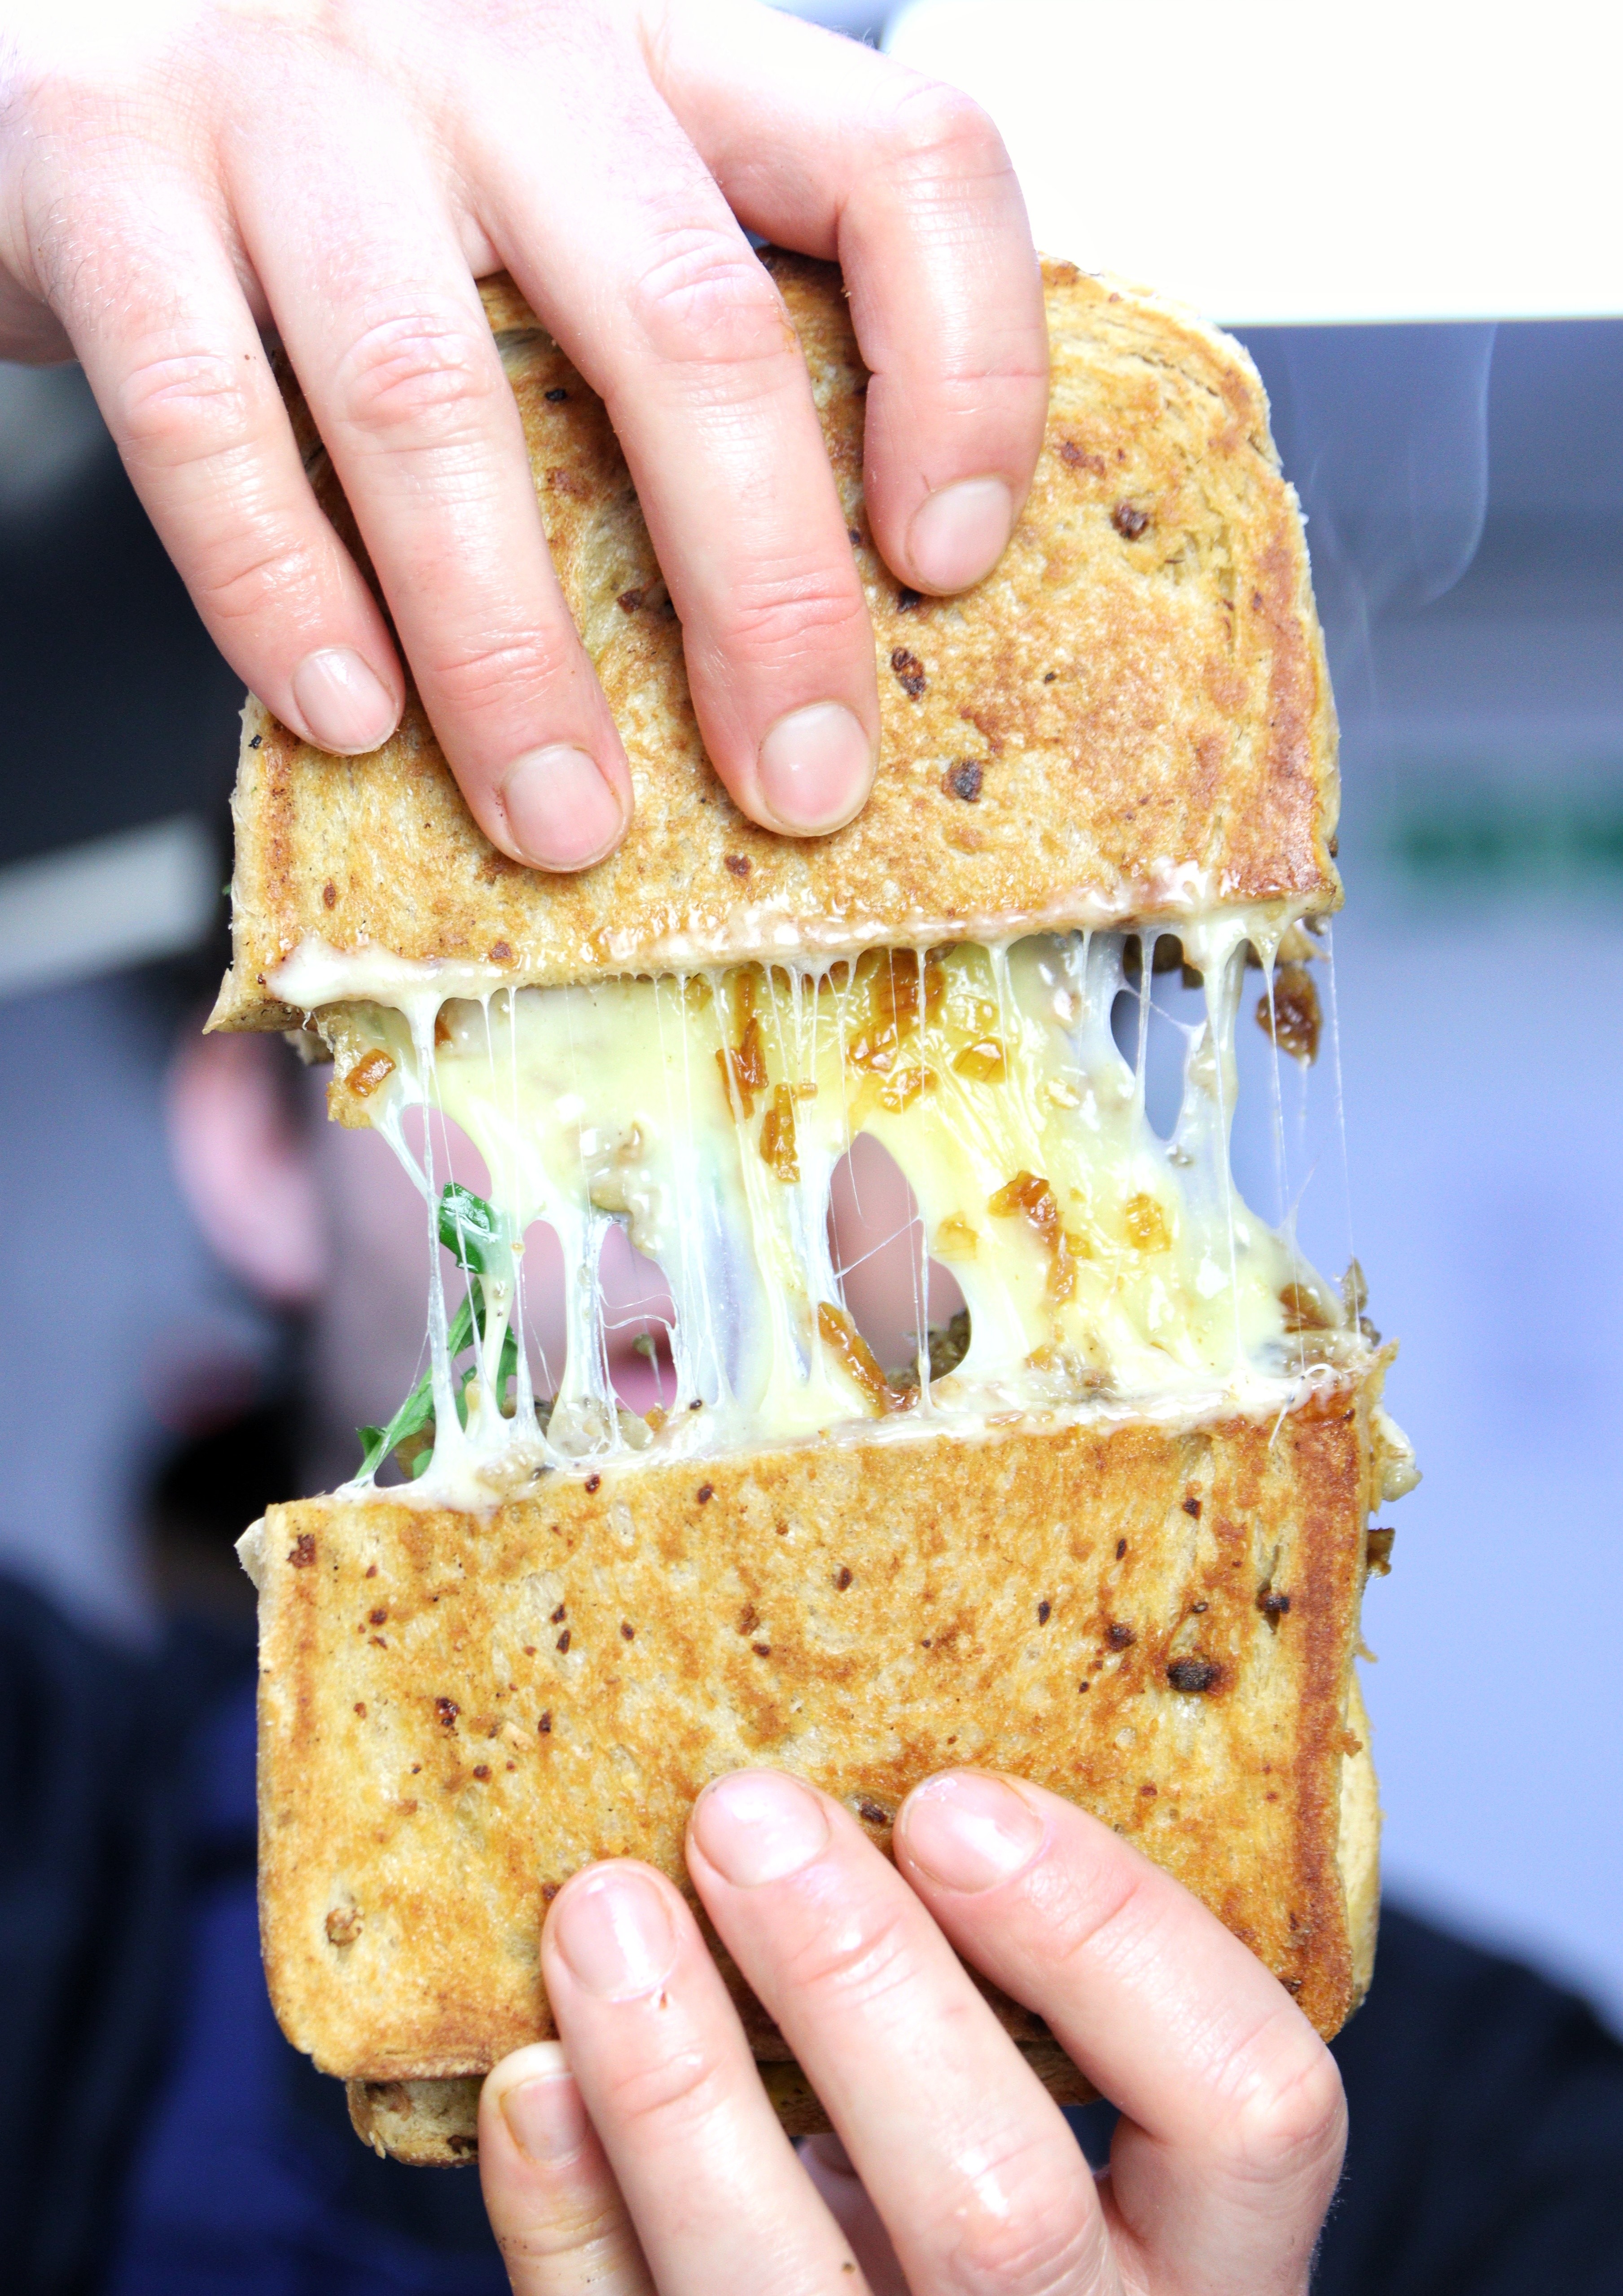 A Deeny's toasty is separated into two, revealing an abundance of cheddar coated ingredients 